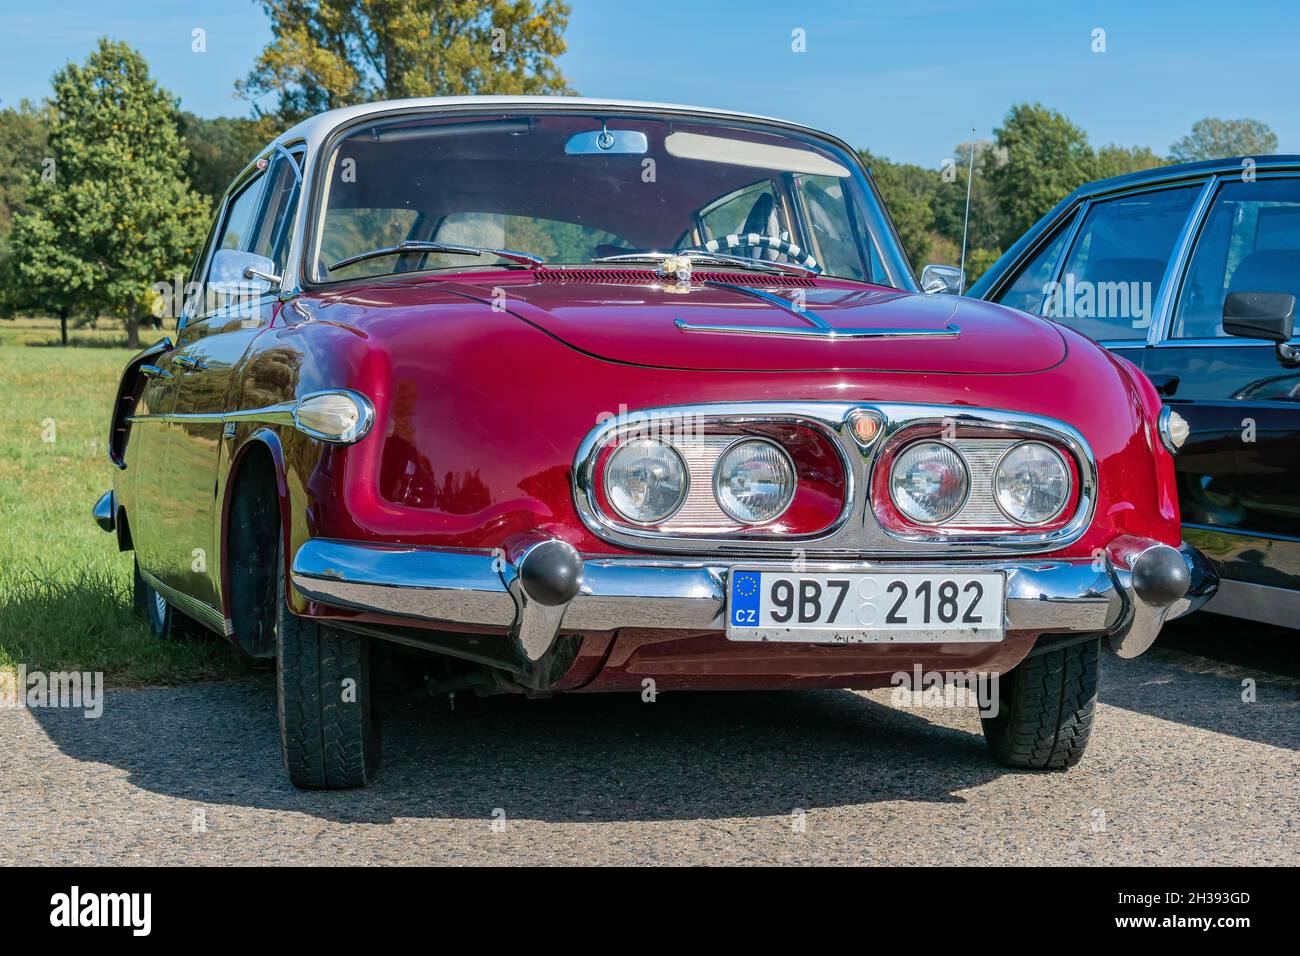 MIKULCICE, CZECH REPUBLIC - Oct 03, 2021: The historic Tatra 603. Legendary vehicle from the time of socialism of high-ranking persons. Stock Photo